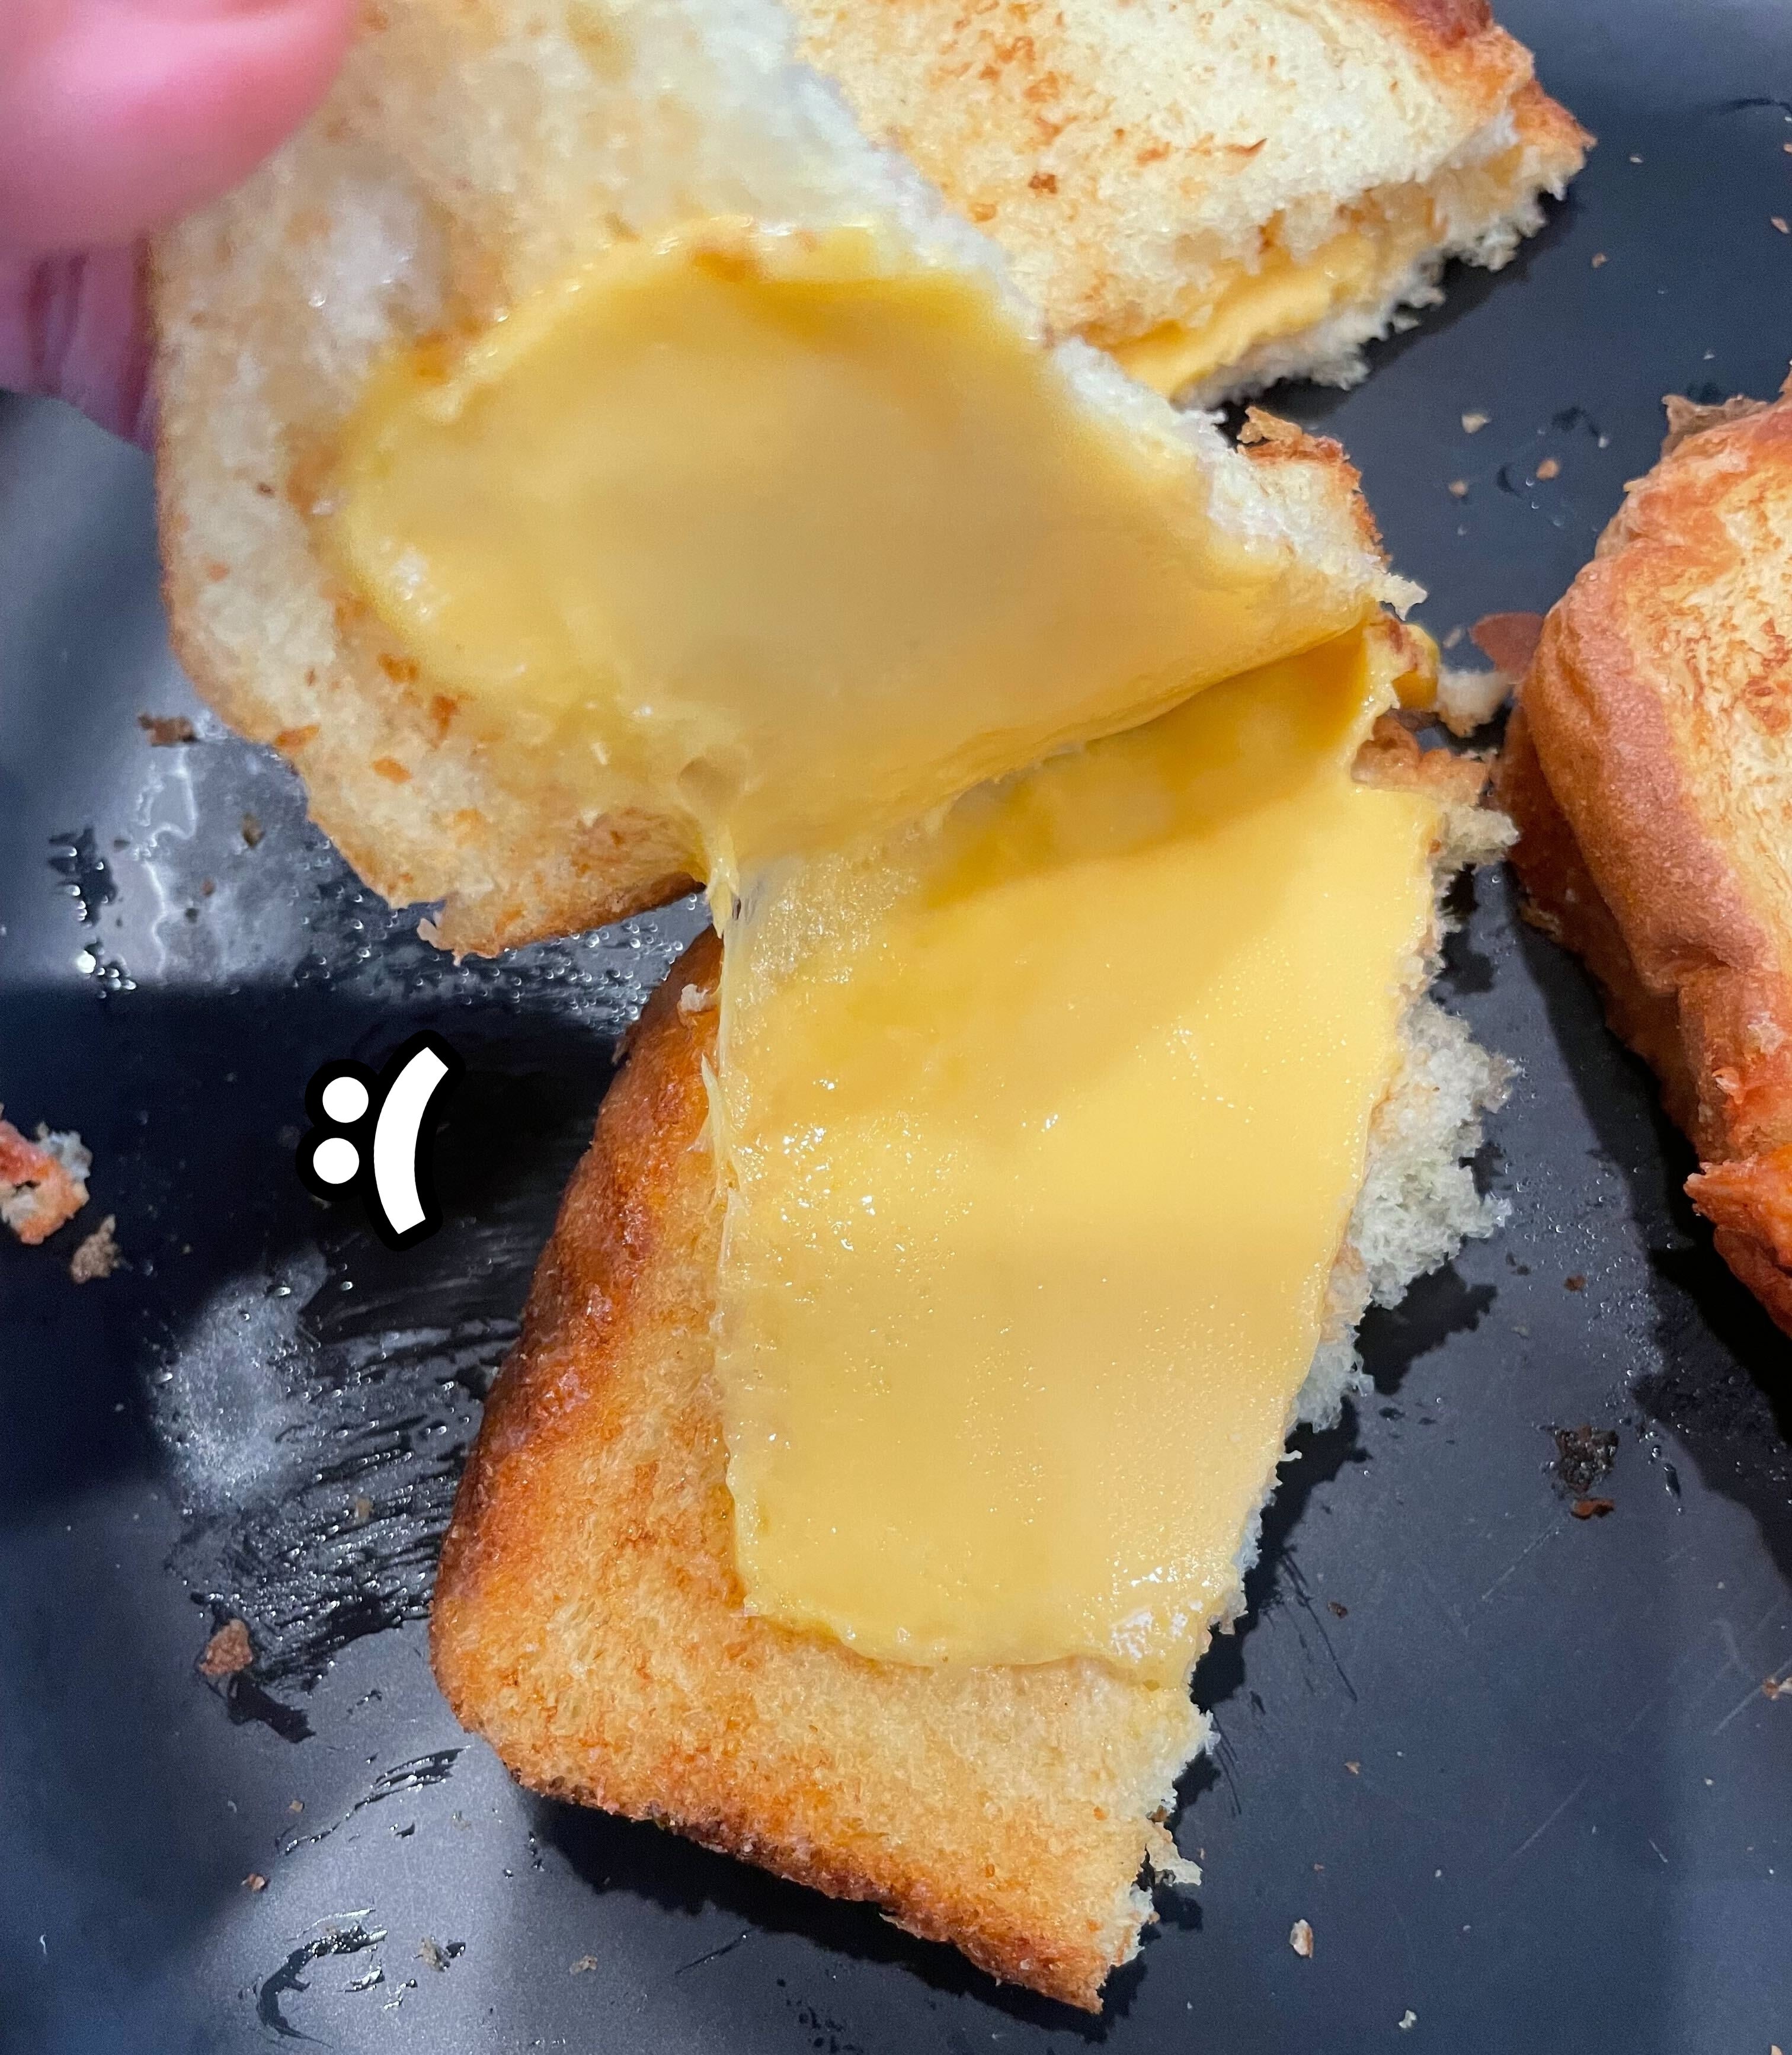 Grilled cheese sandwich on a plate, cut open with only slightly melted cheese